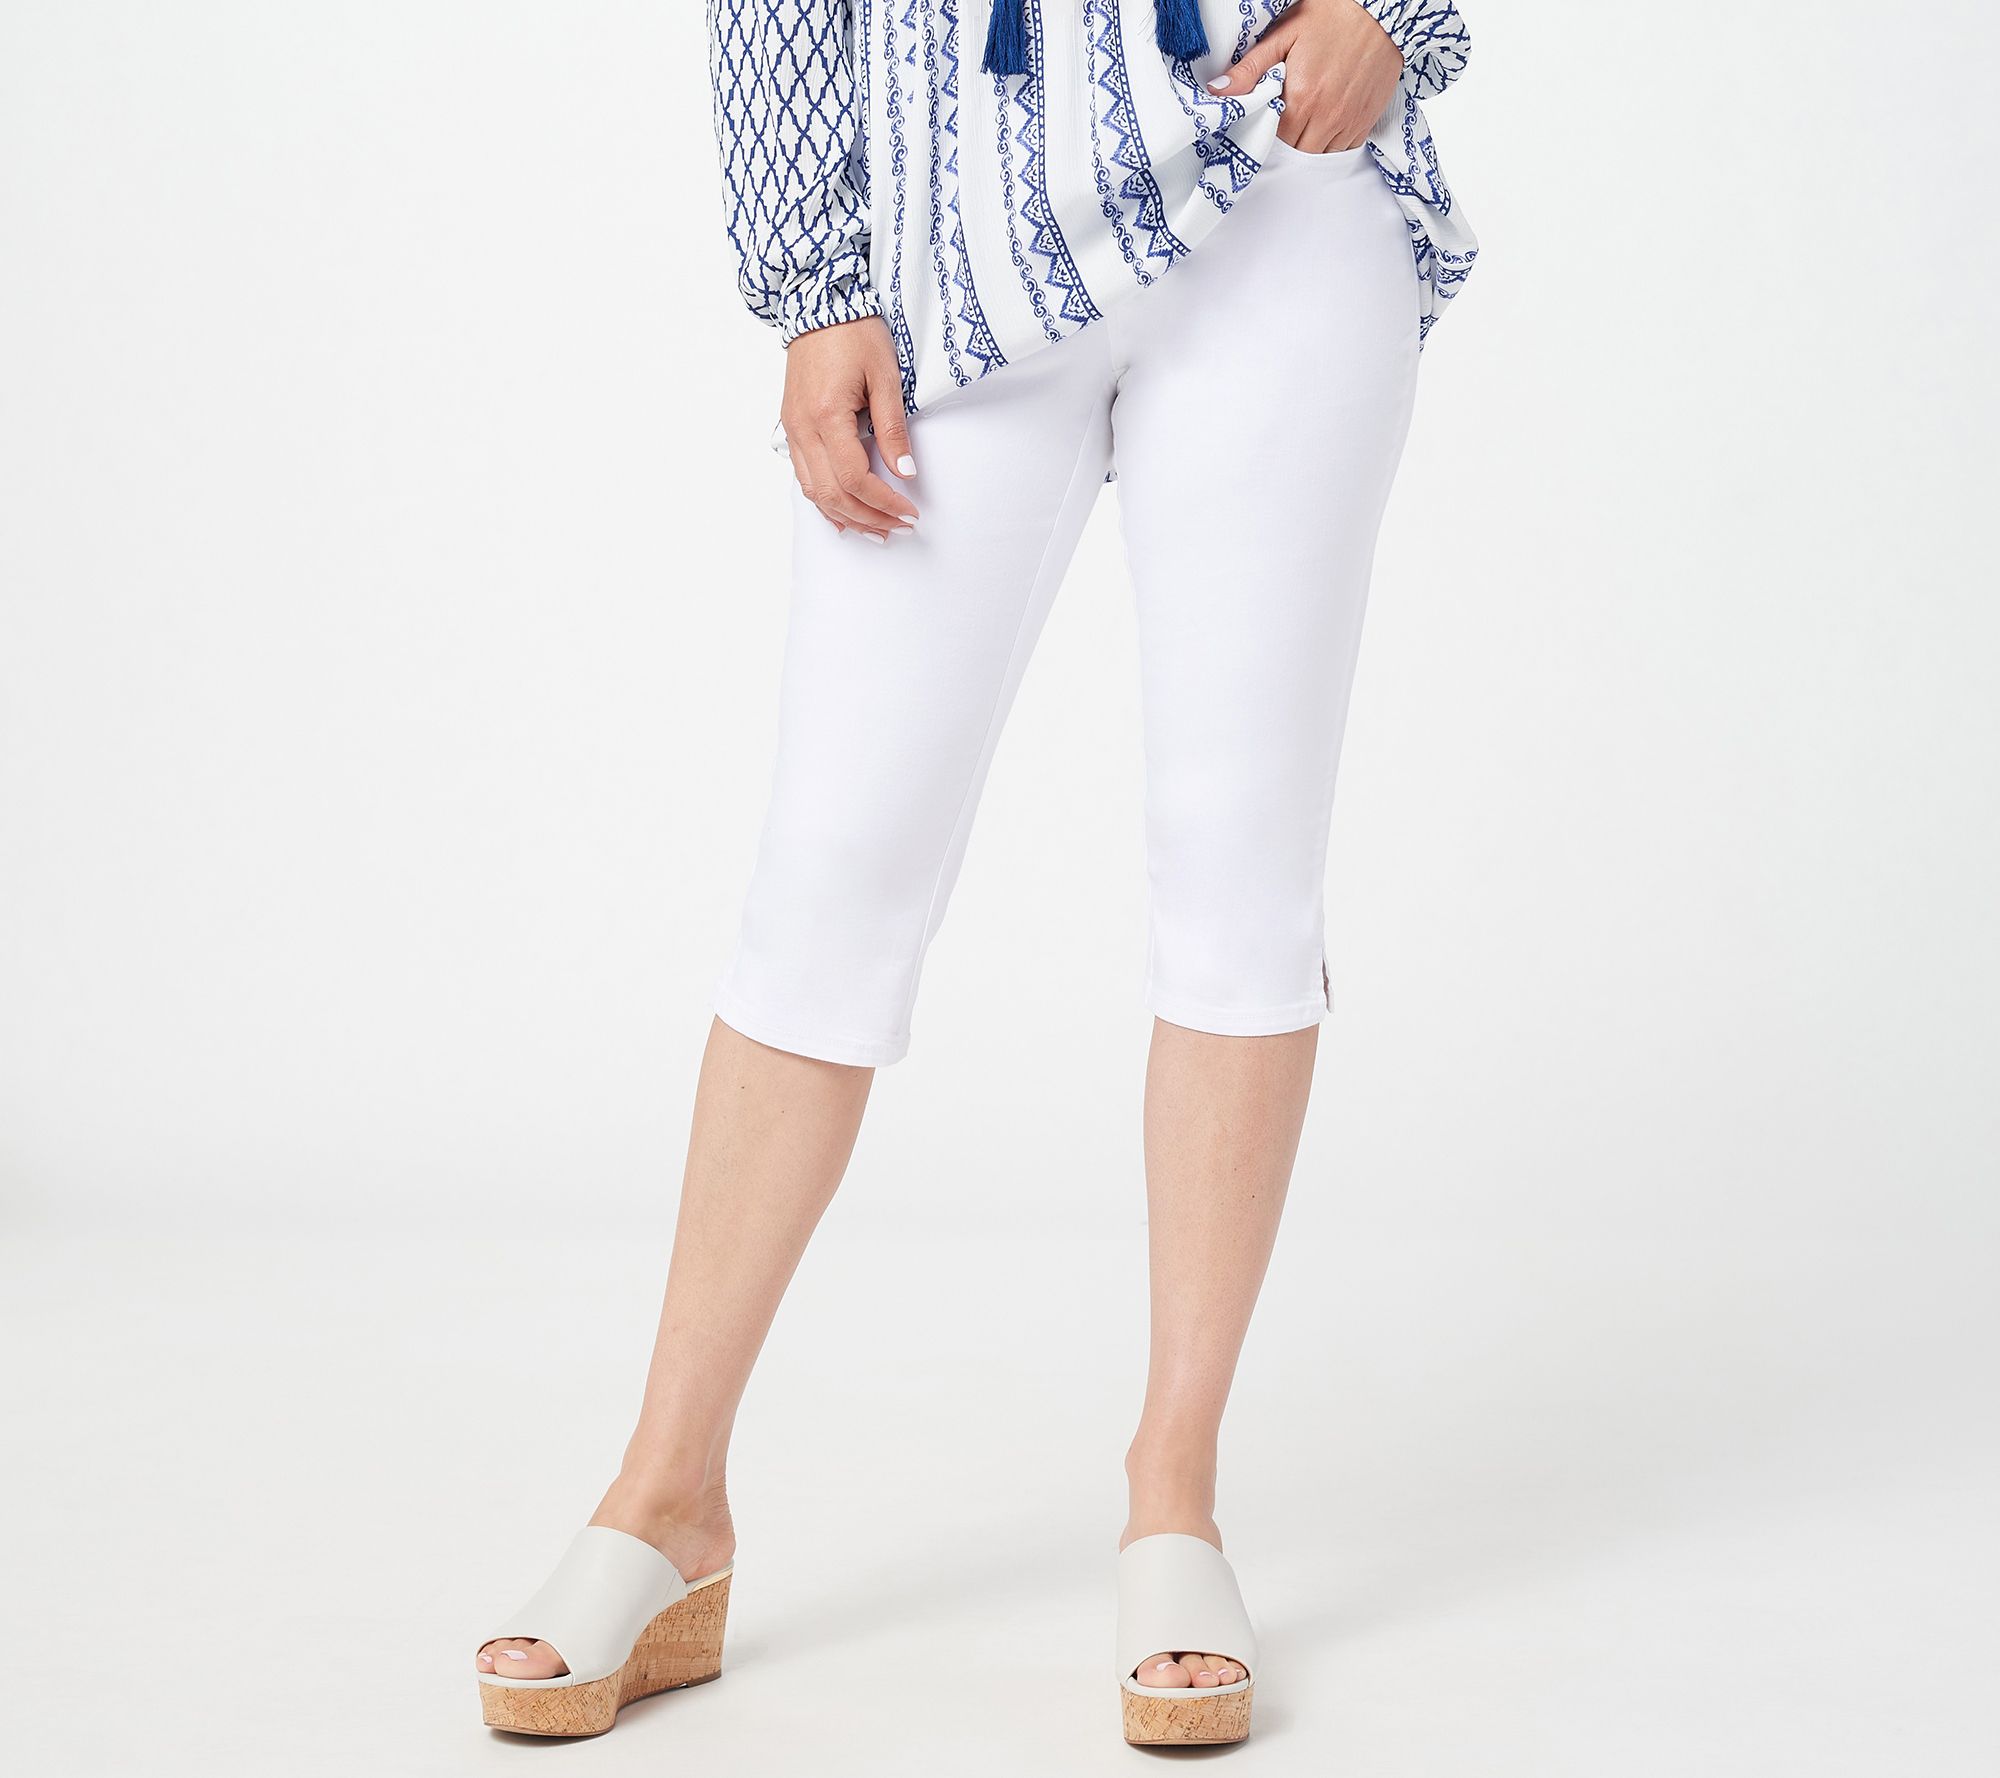 As Is Belle by Kim Gravel Ponte Knit Capri Pants with Side Vents 